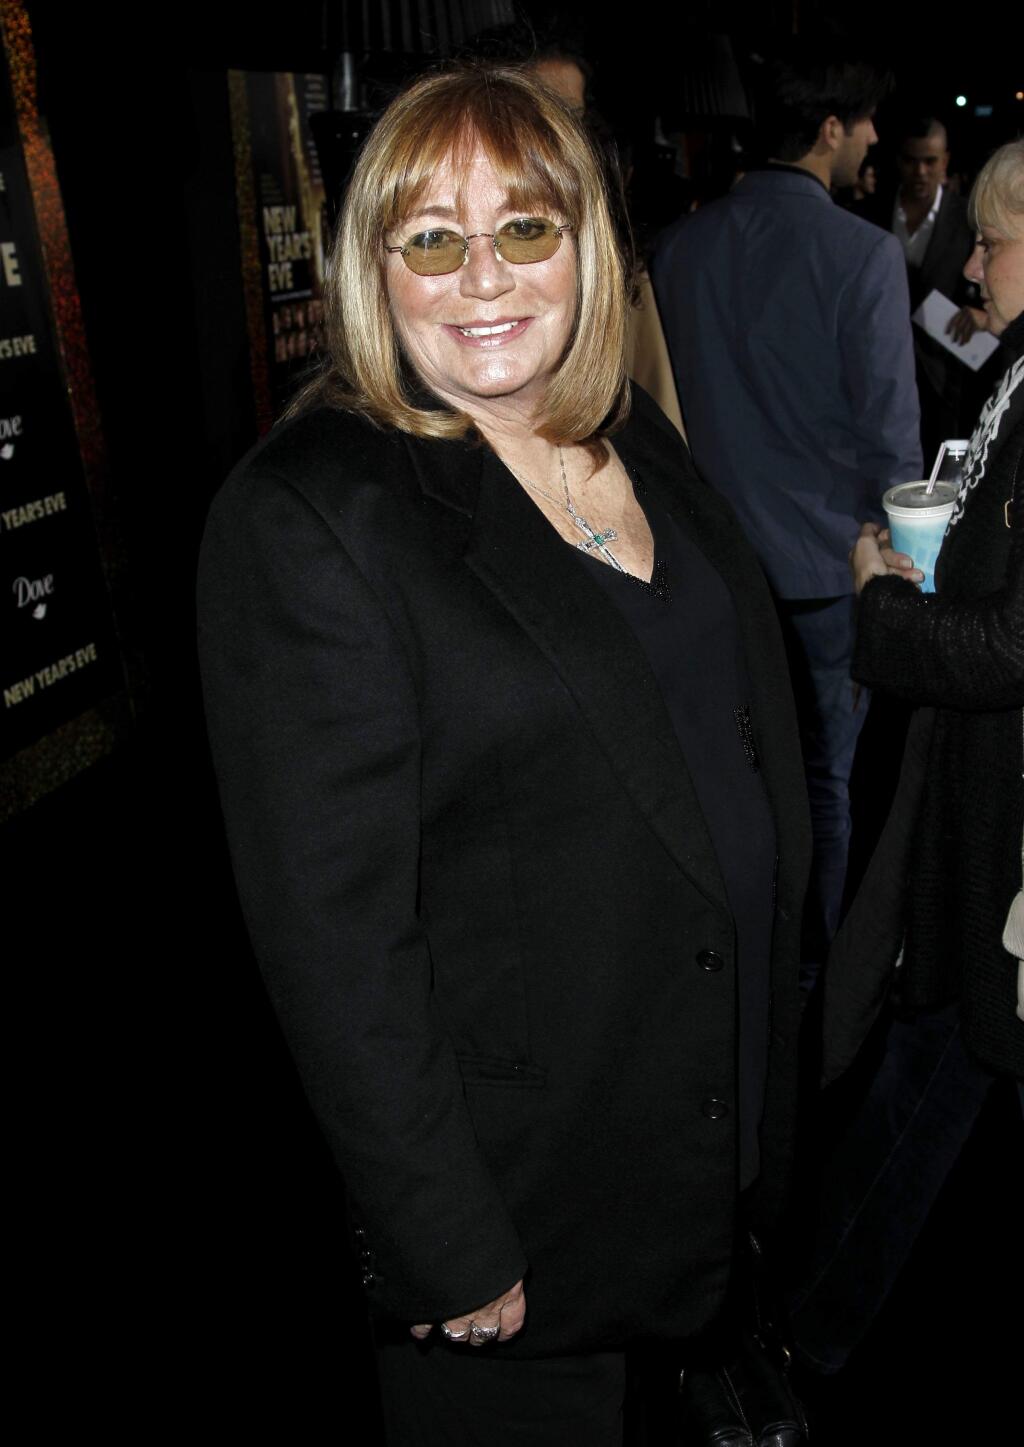 FILE - In this Dec. 5, 2011 file photo, Penny Marshall arrives at the premiere of 'New Year's Eve' in Los Angeles. Marshall died of complications from diabetes on Monday, Dec. 17, 2018, at her Hollywood Hills home. She was 75. (AP Photo/Matt Sayles, File)